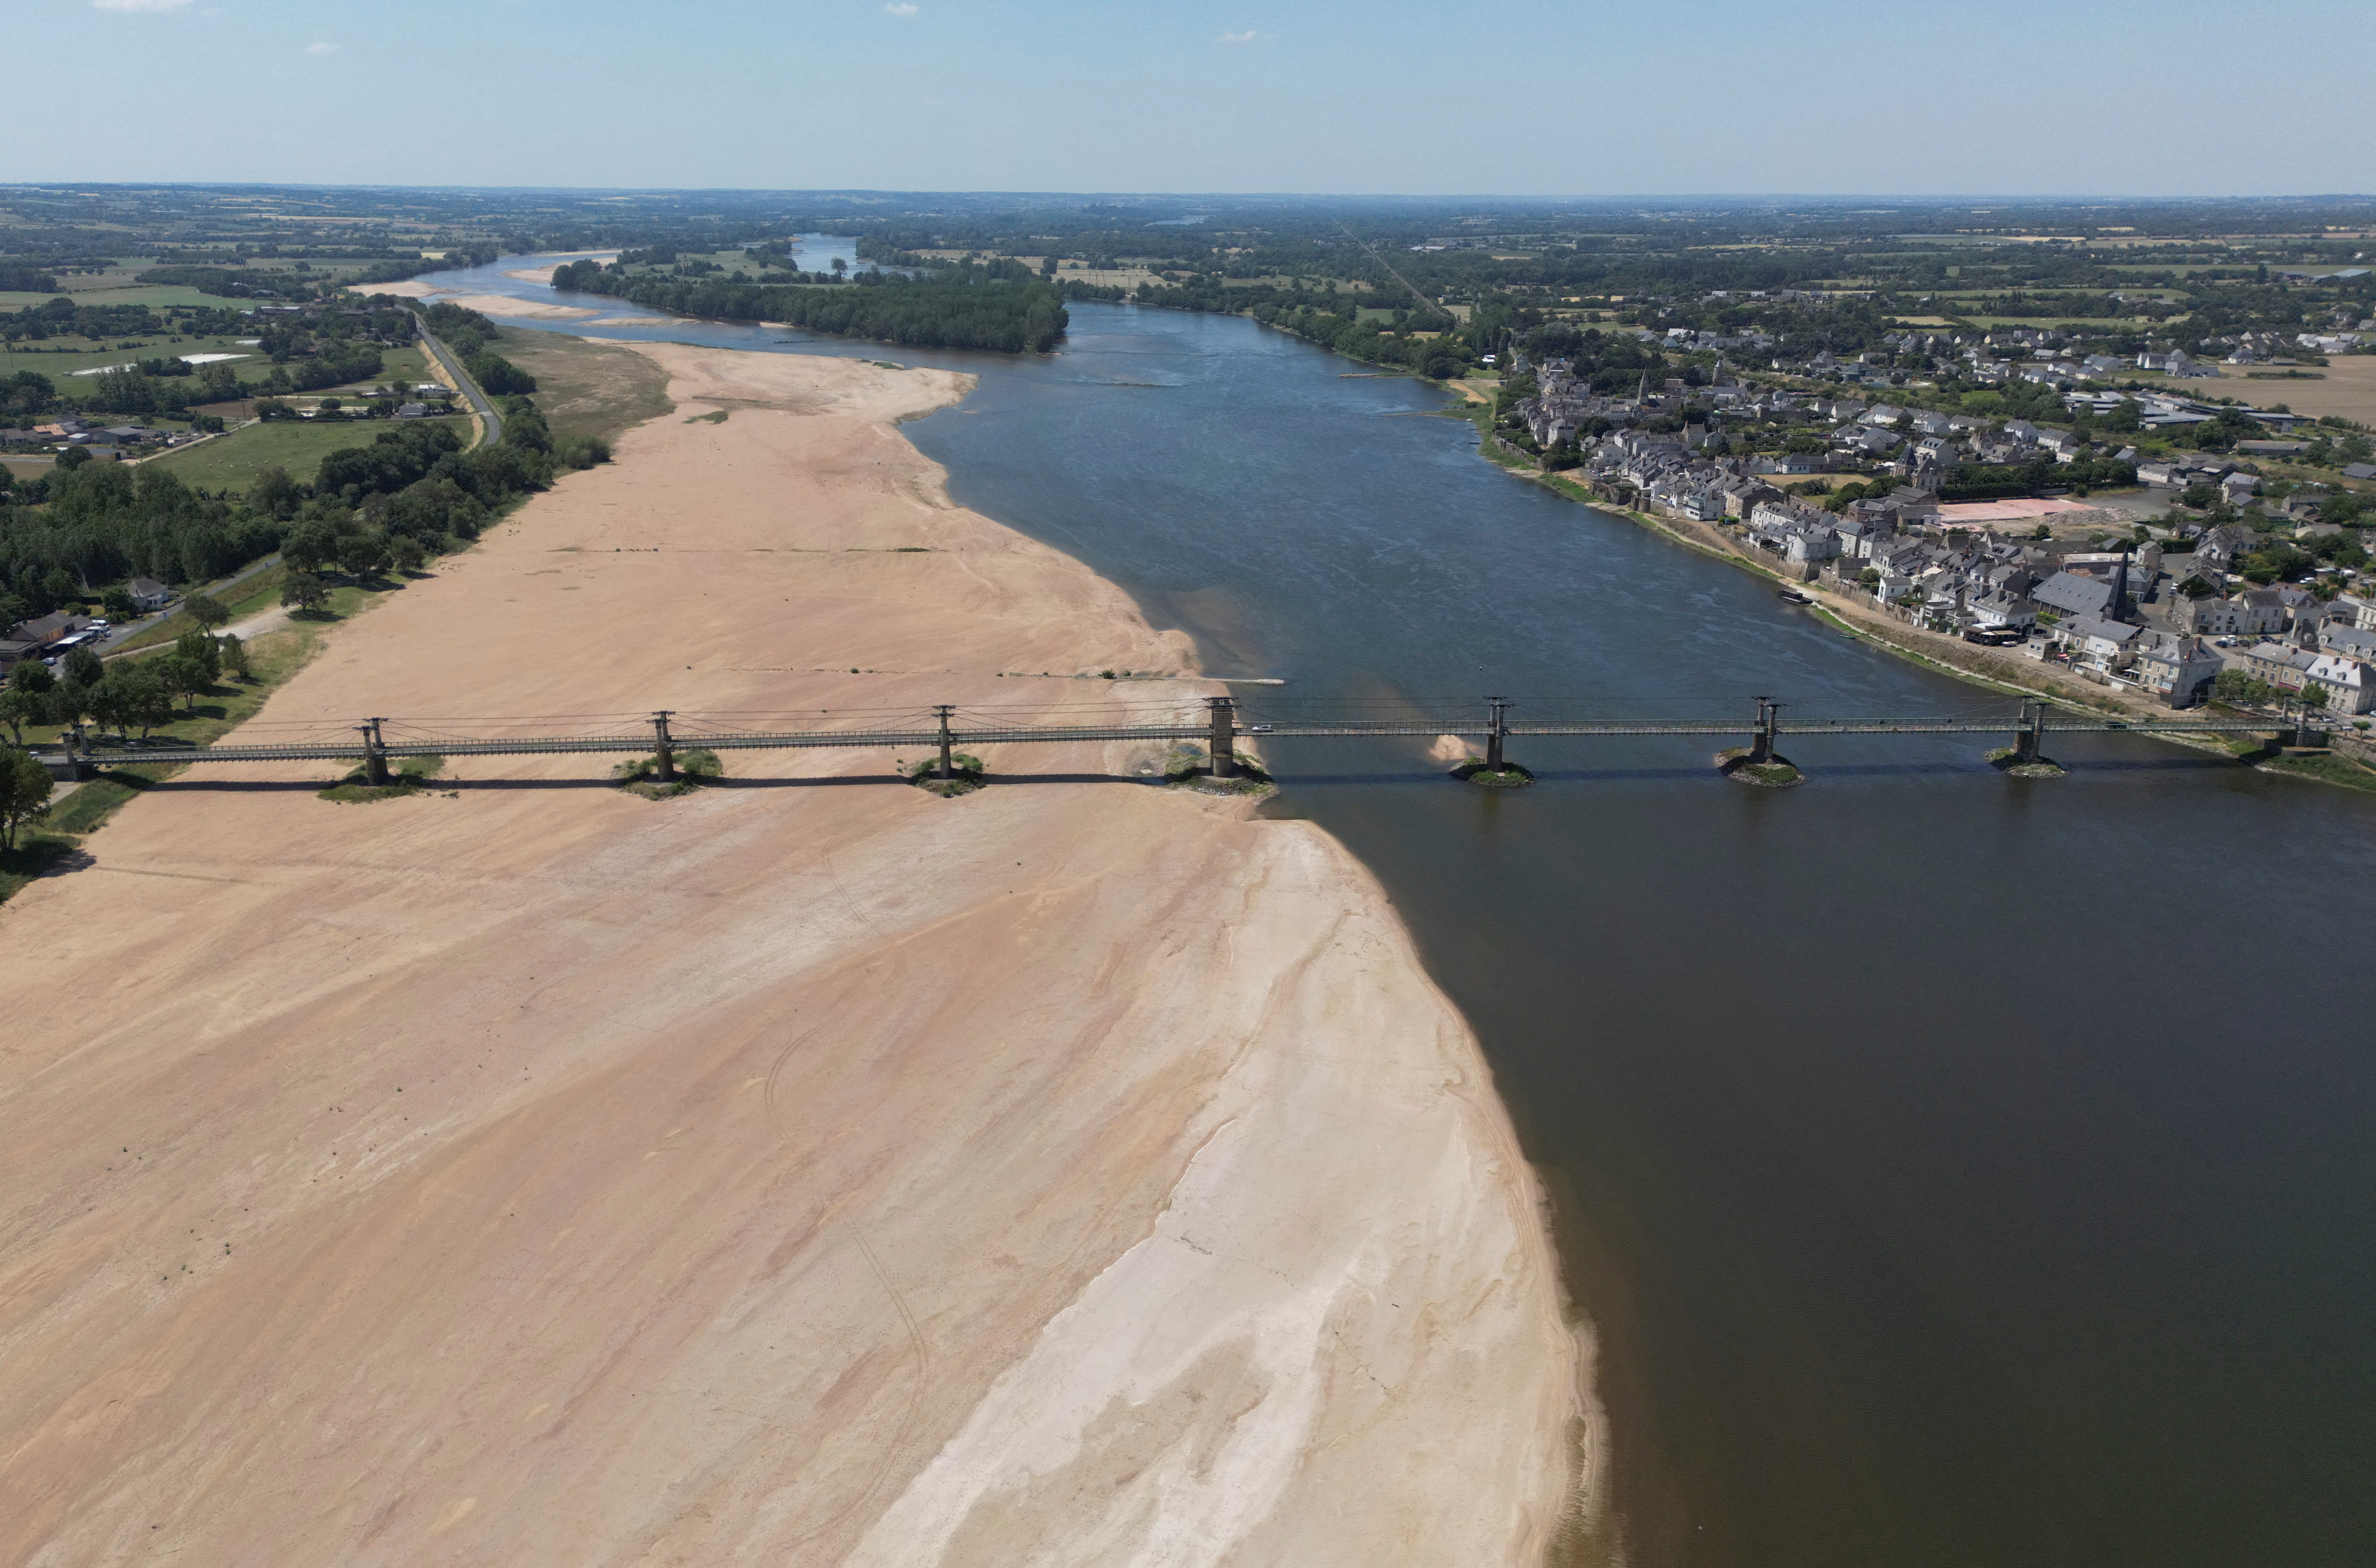 France's Loire river dried up last August following a record summer temperatures in Europe – and climate scientists fear worse is to come. /Stephane Mahe/Reuters